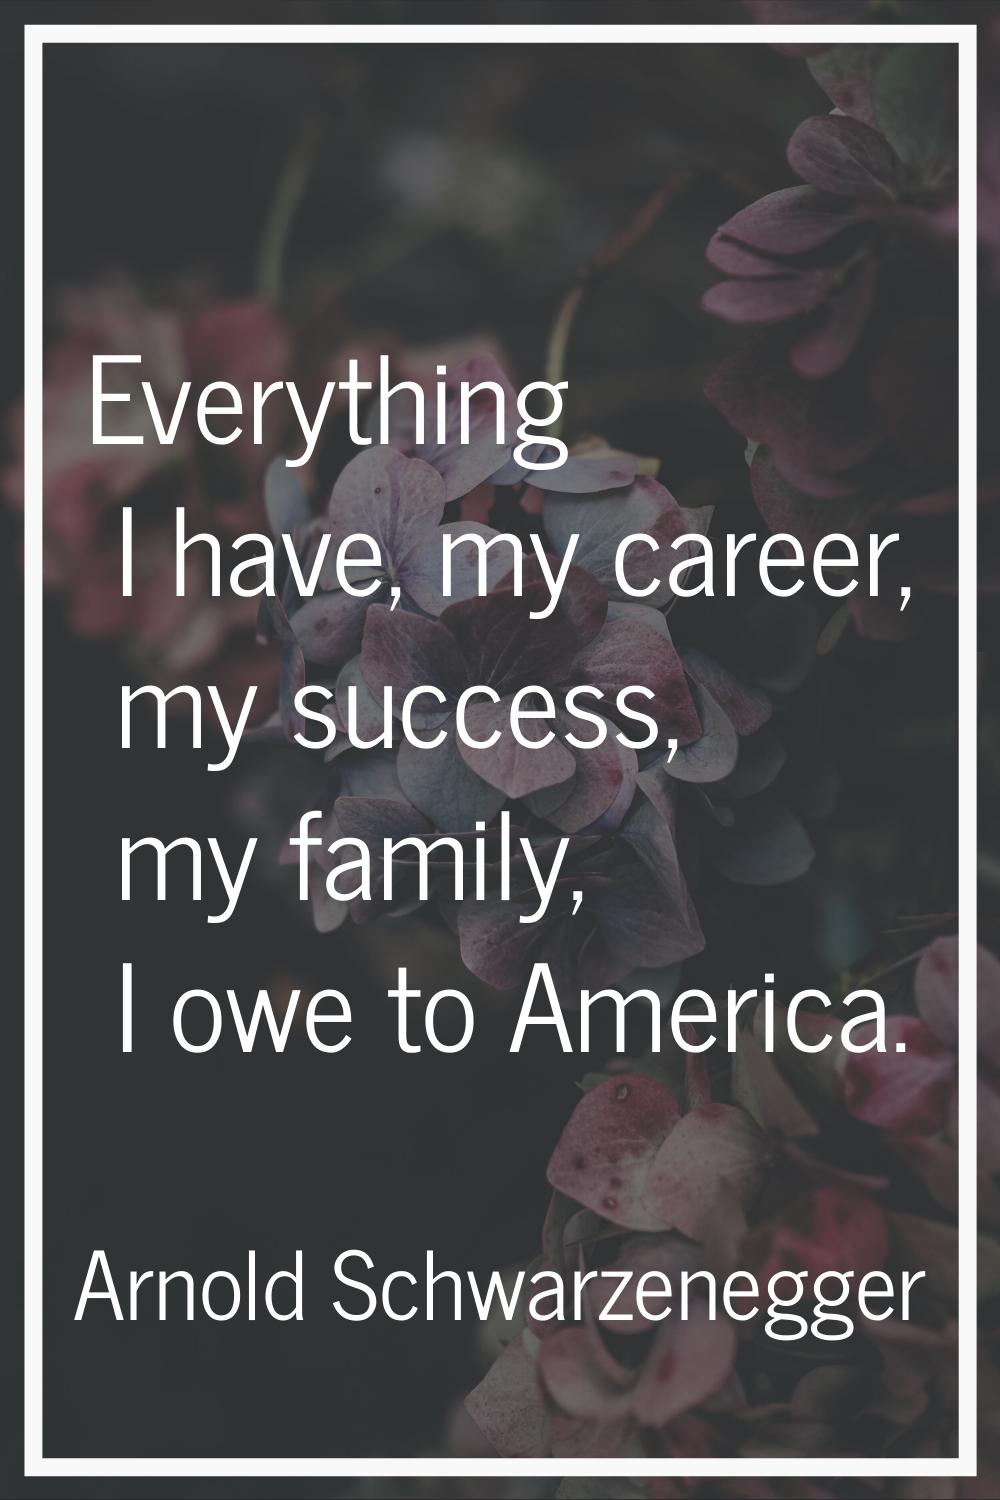 Everything I have, my career, my success, my family, I owe to America.